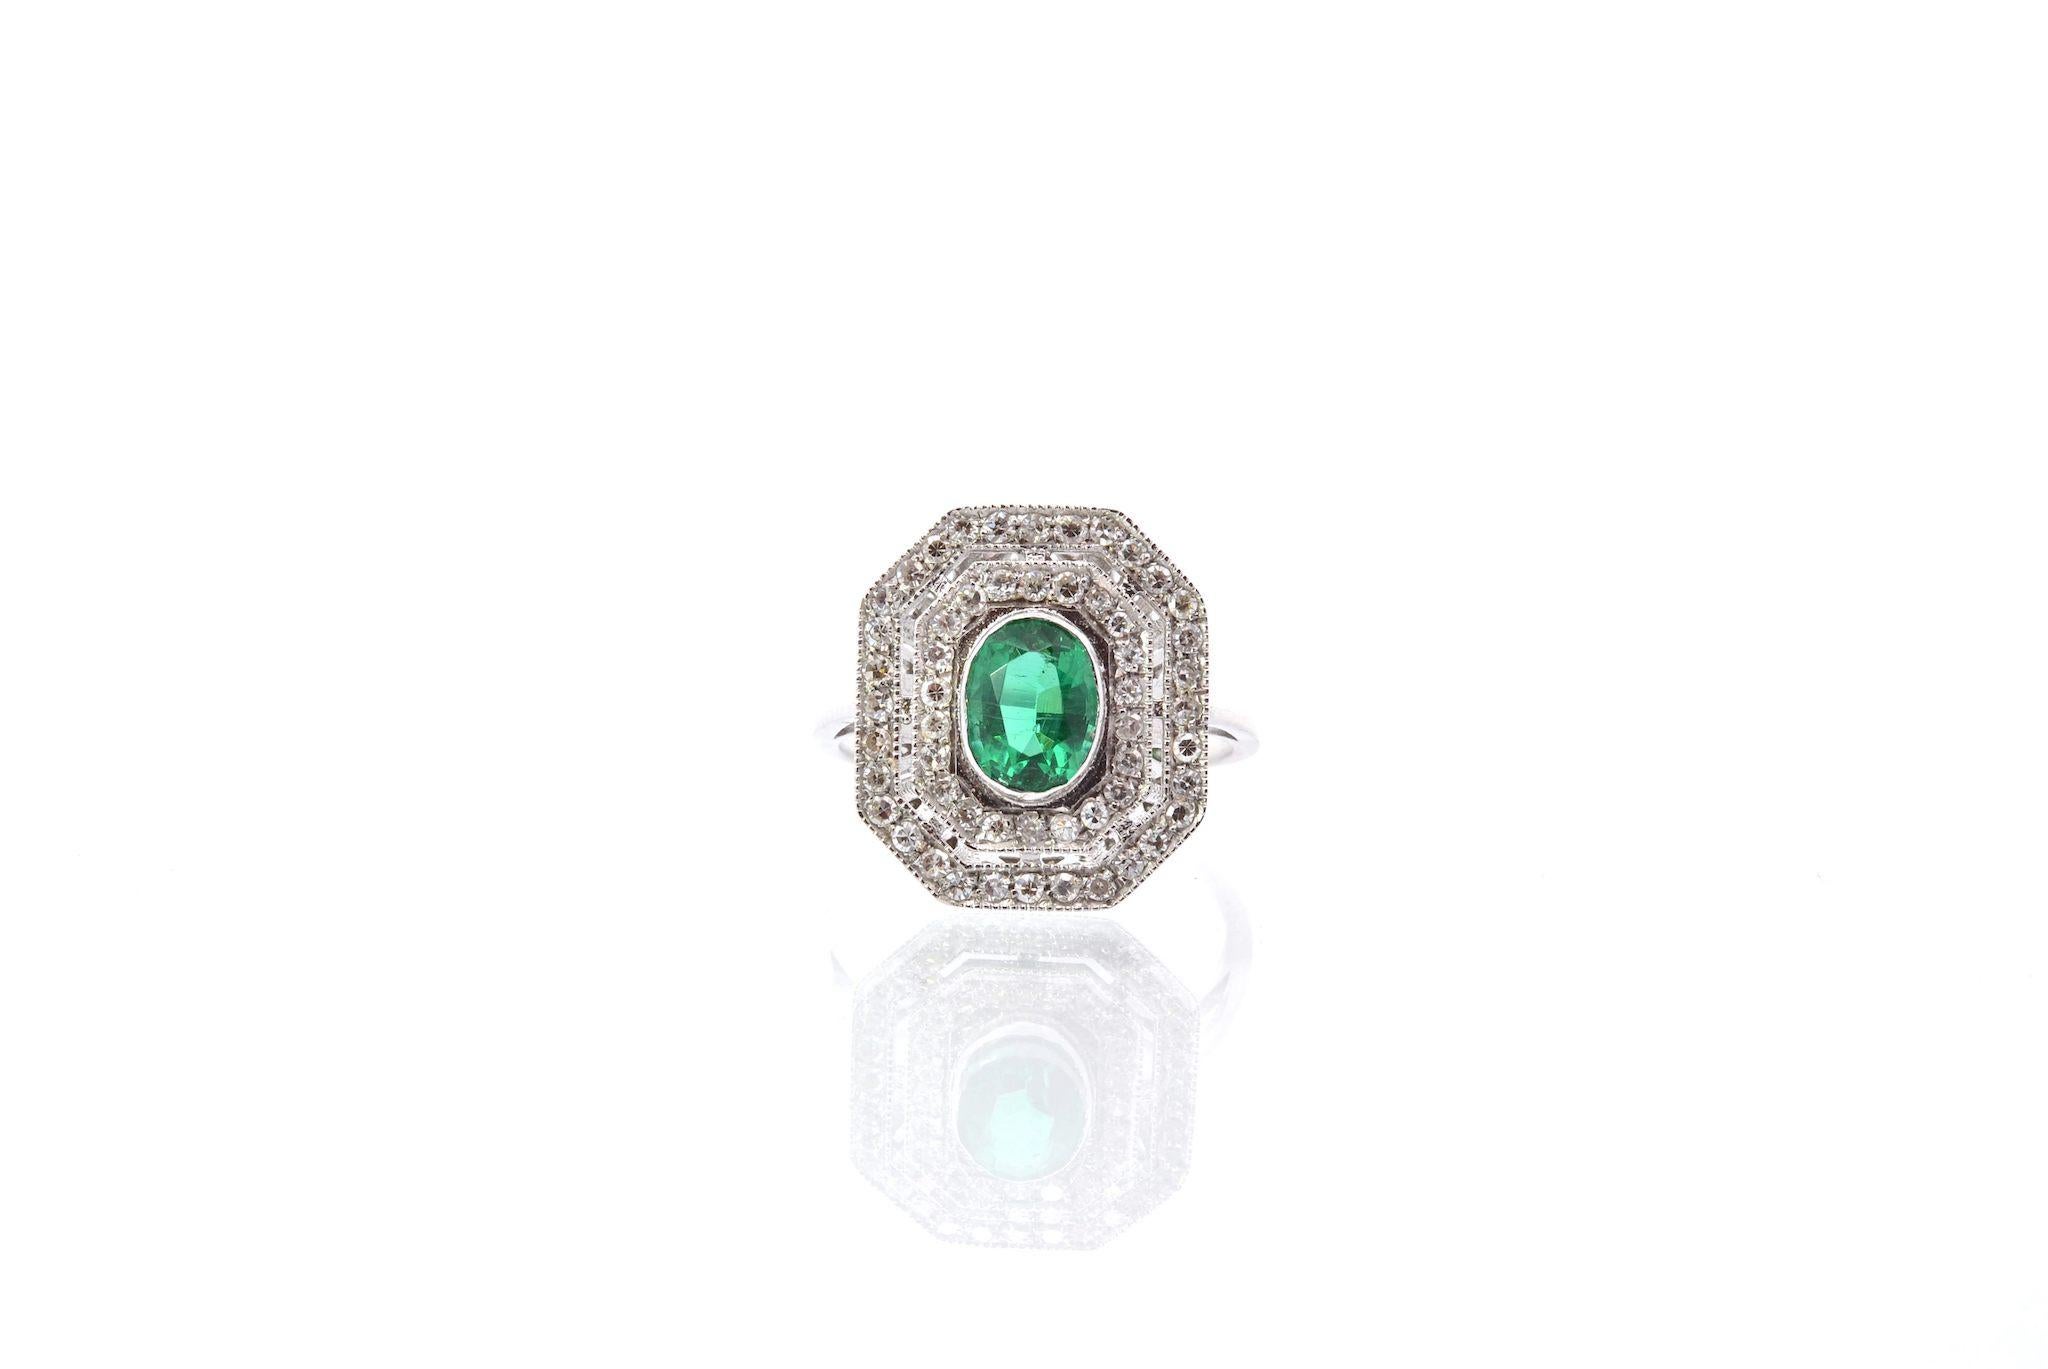 Stones: 1 emerald of 0.90 ct, 54 diamonds: 0.85ct
Material: 18k white gold
Dimensions: 1.6cm x 1.4cm
Weight: 3.6g
Period: Recent
Size: 53 (free sizing)
Certificate
Ref. : 25338